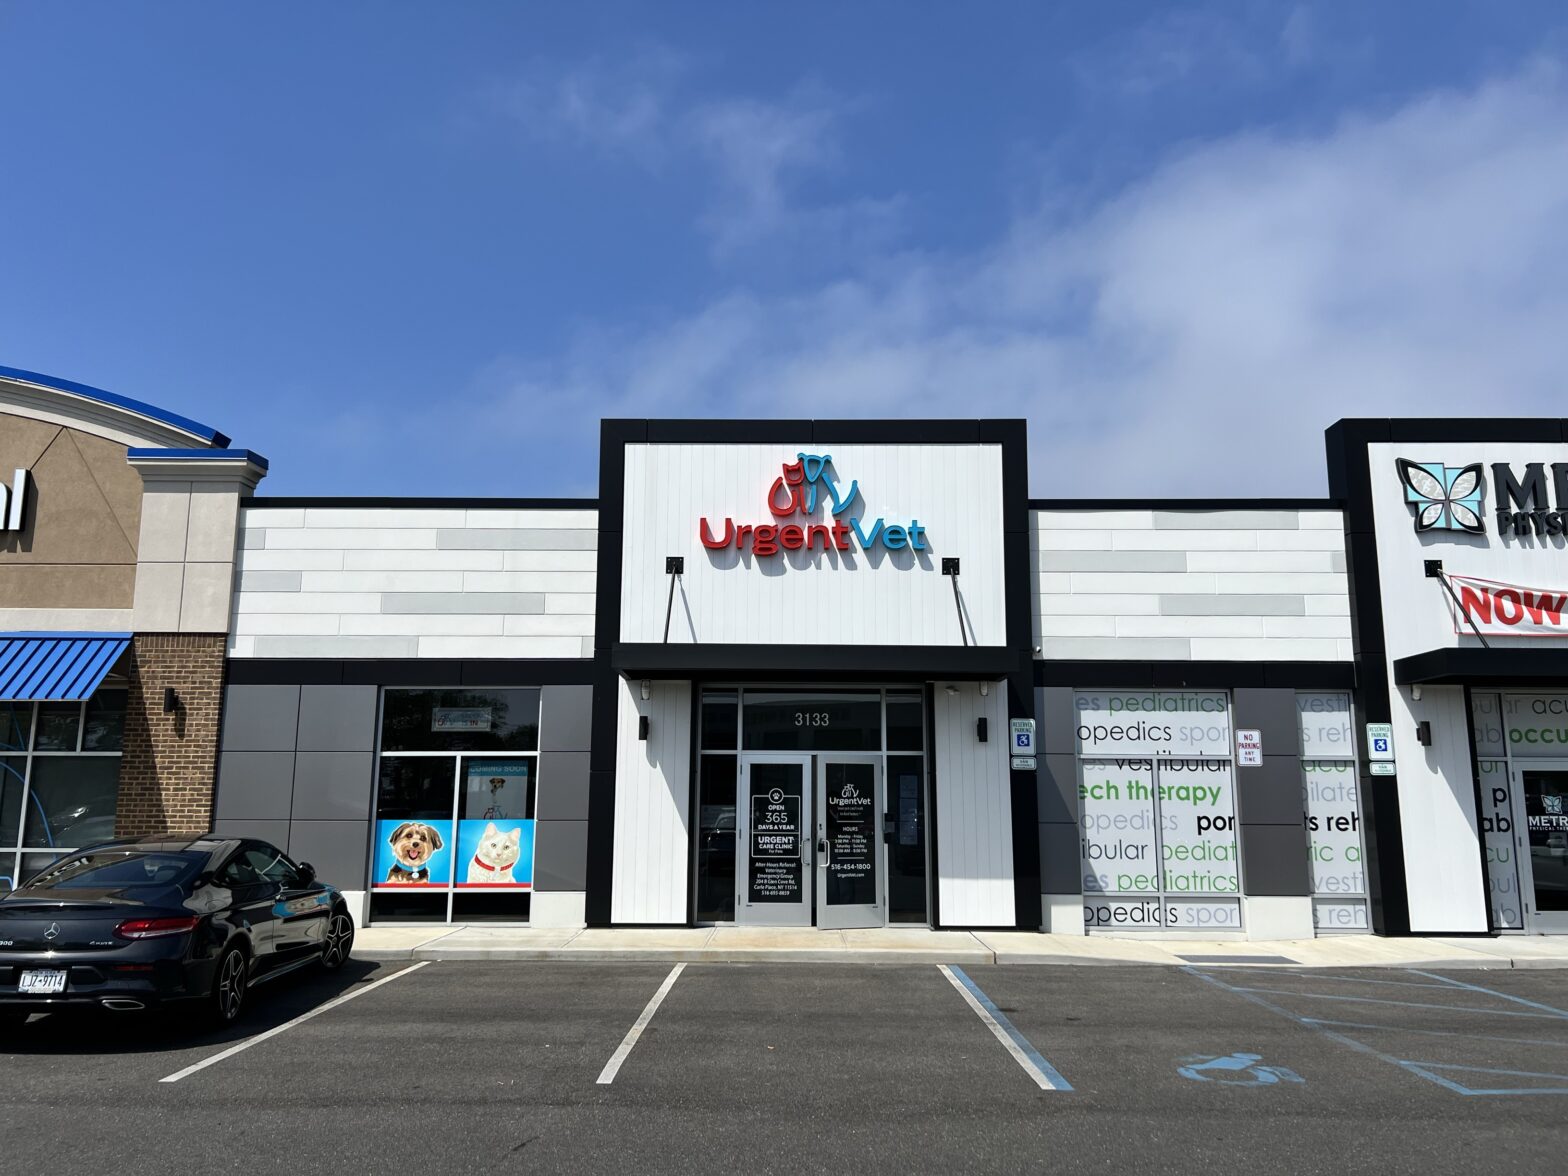 Featured image for post: After-Hours Pet Care Option To Open In New York With First Location In Oceanside